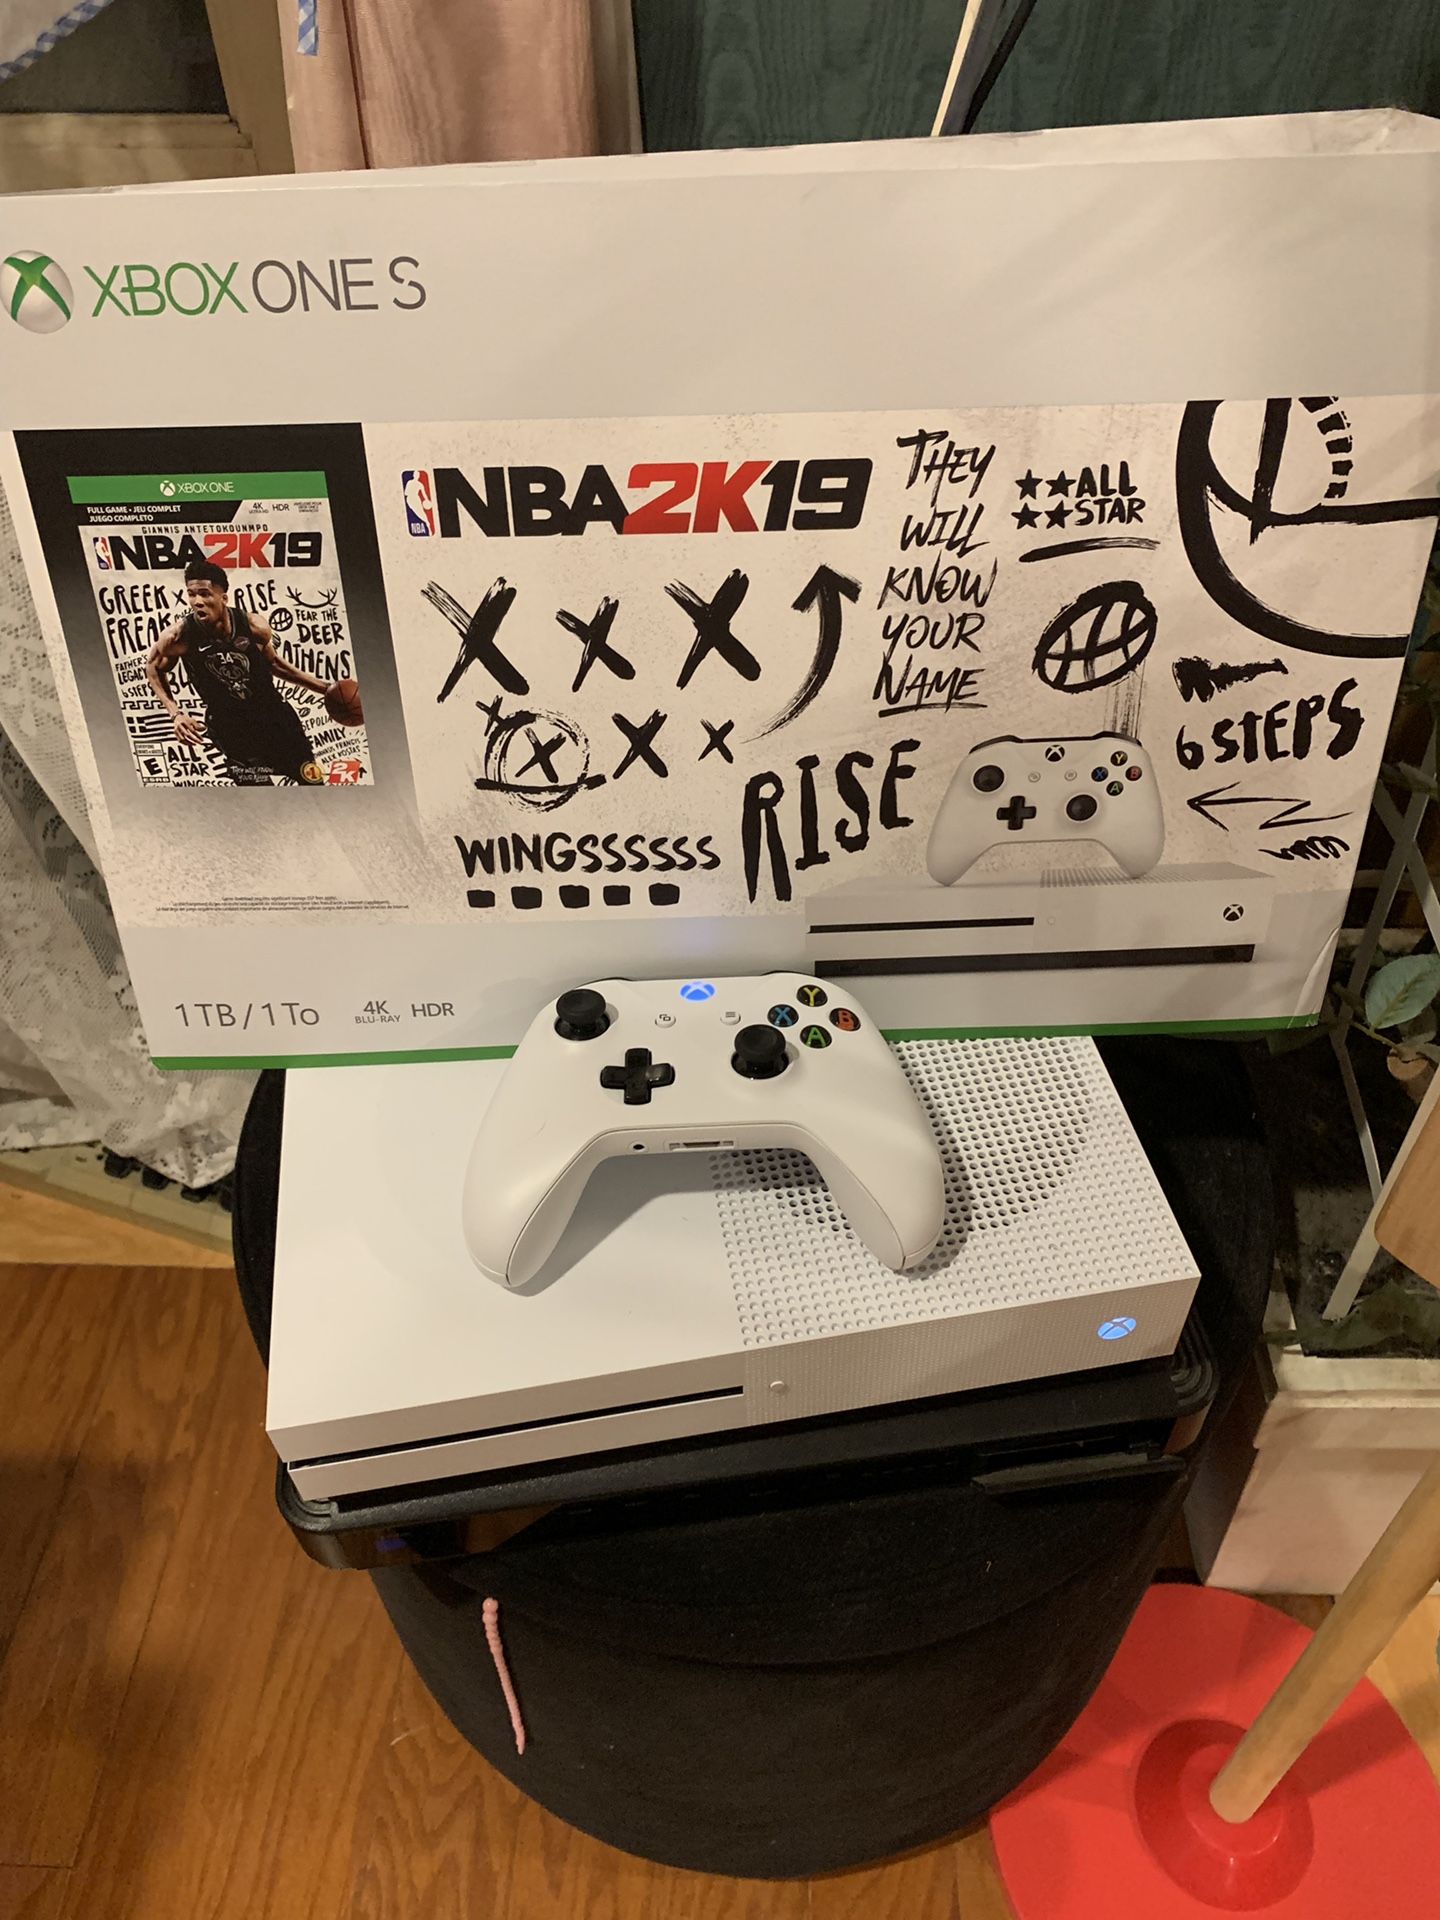 Xbox one s. 1 TB. With controller and nba 2k19 and hdmi. Asking $180 obo